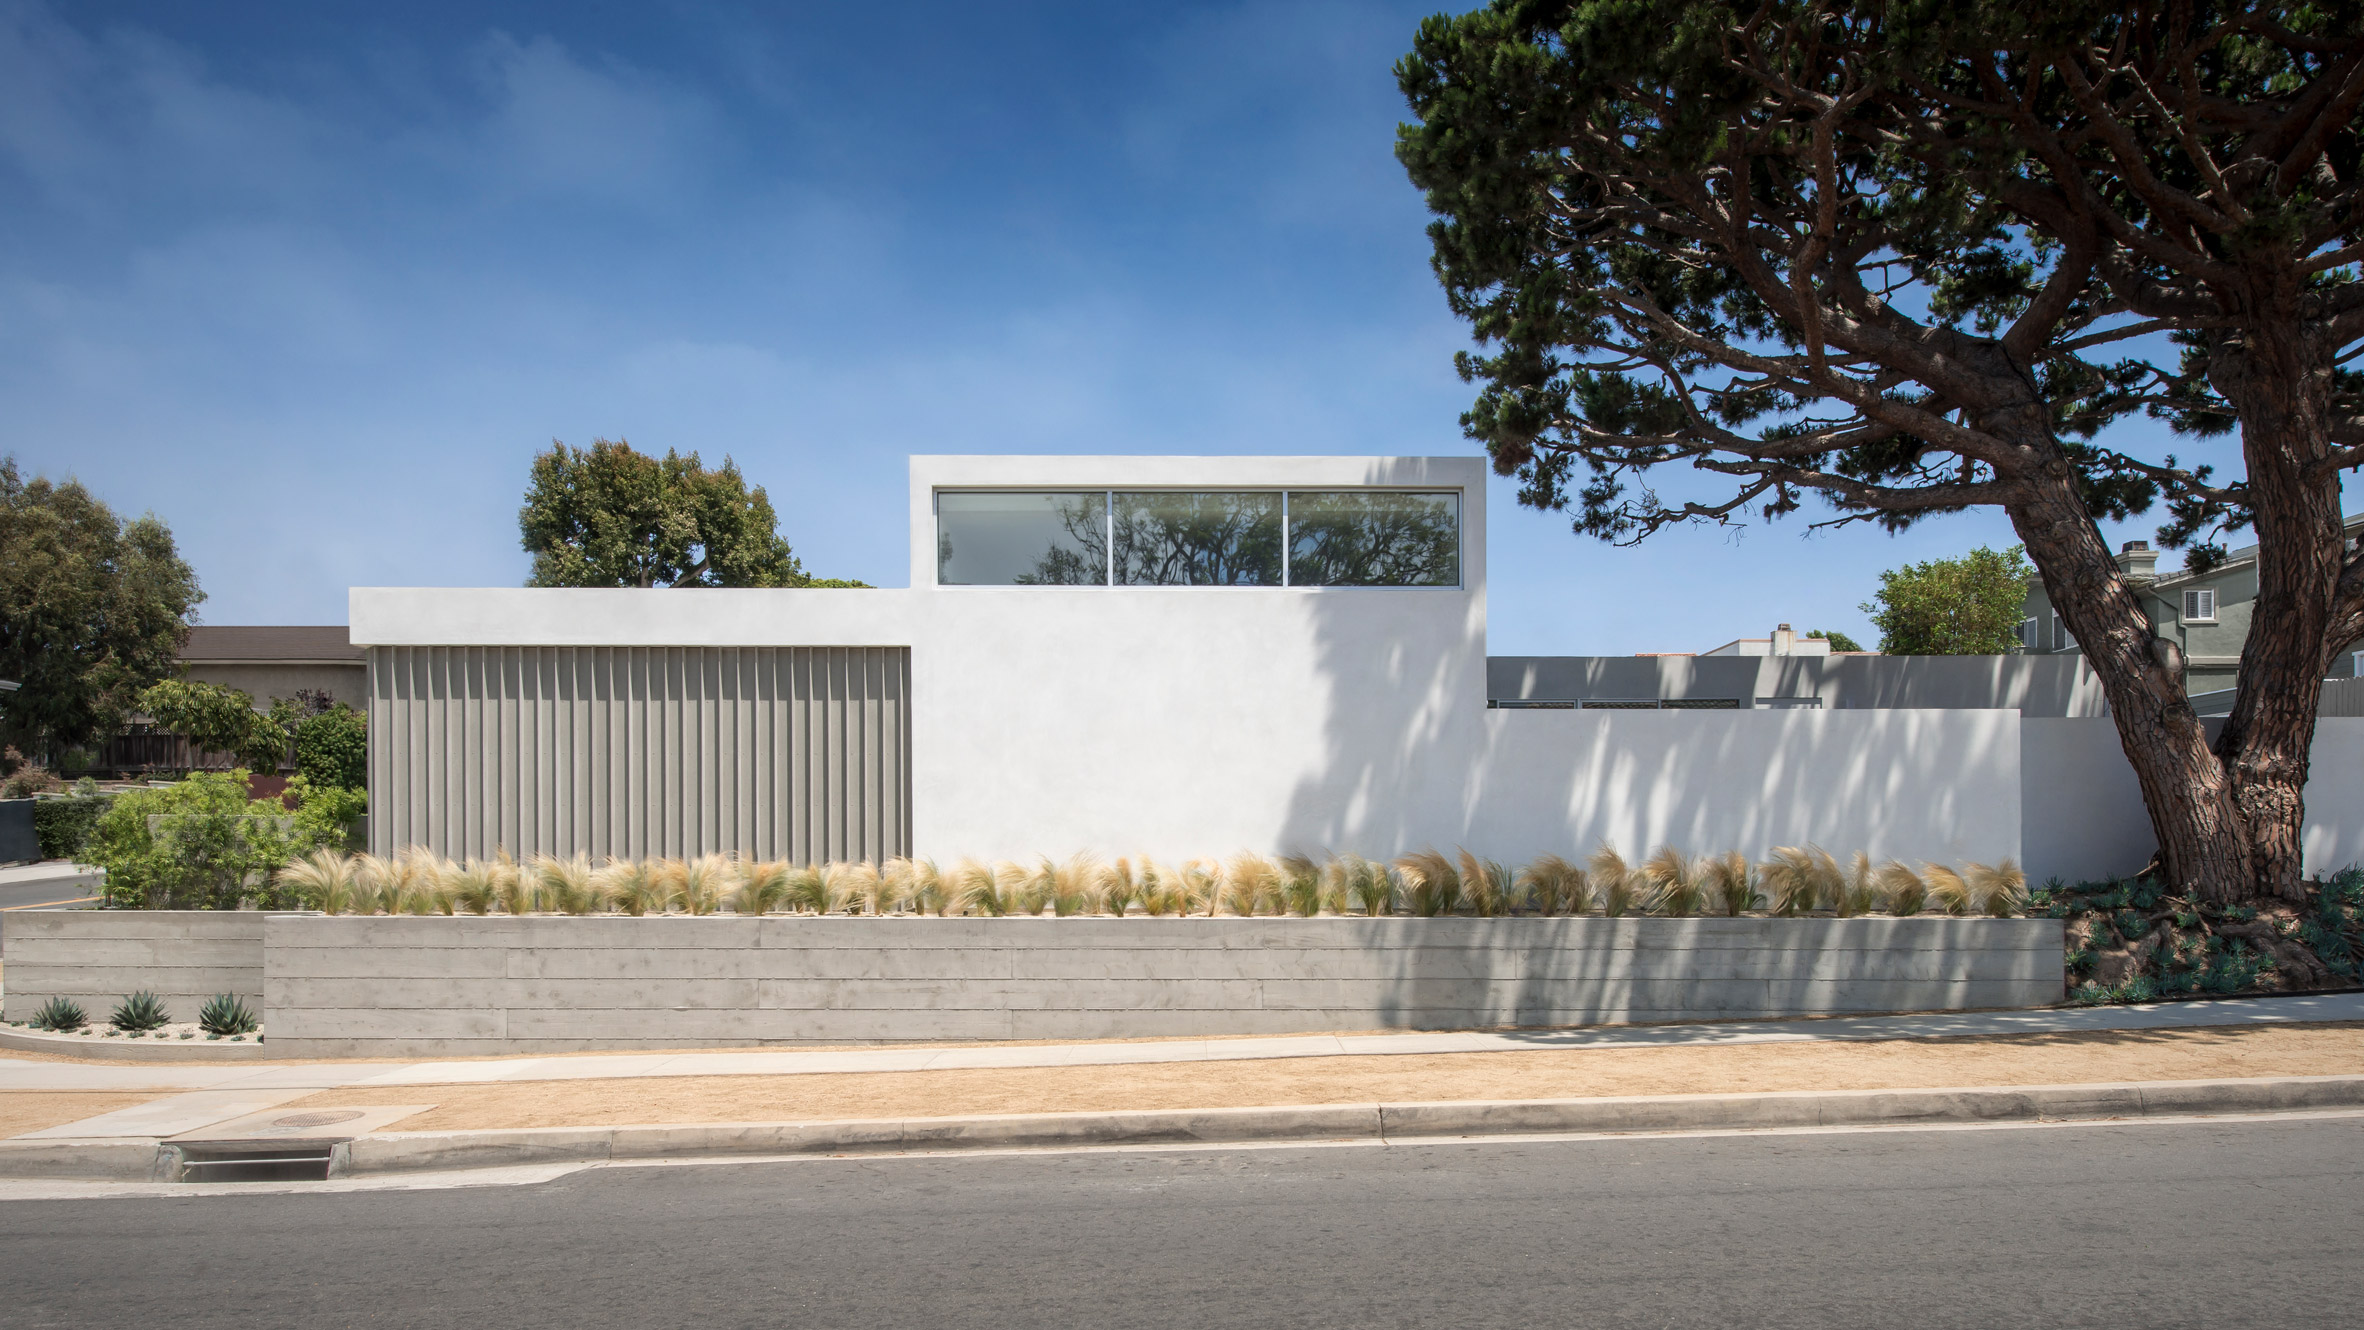 Edward Ogosta overhauls California bungalow with "clarity and restraint"